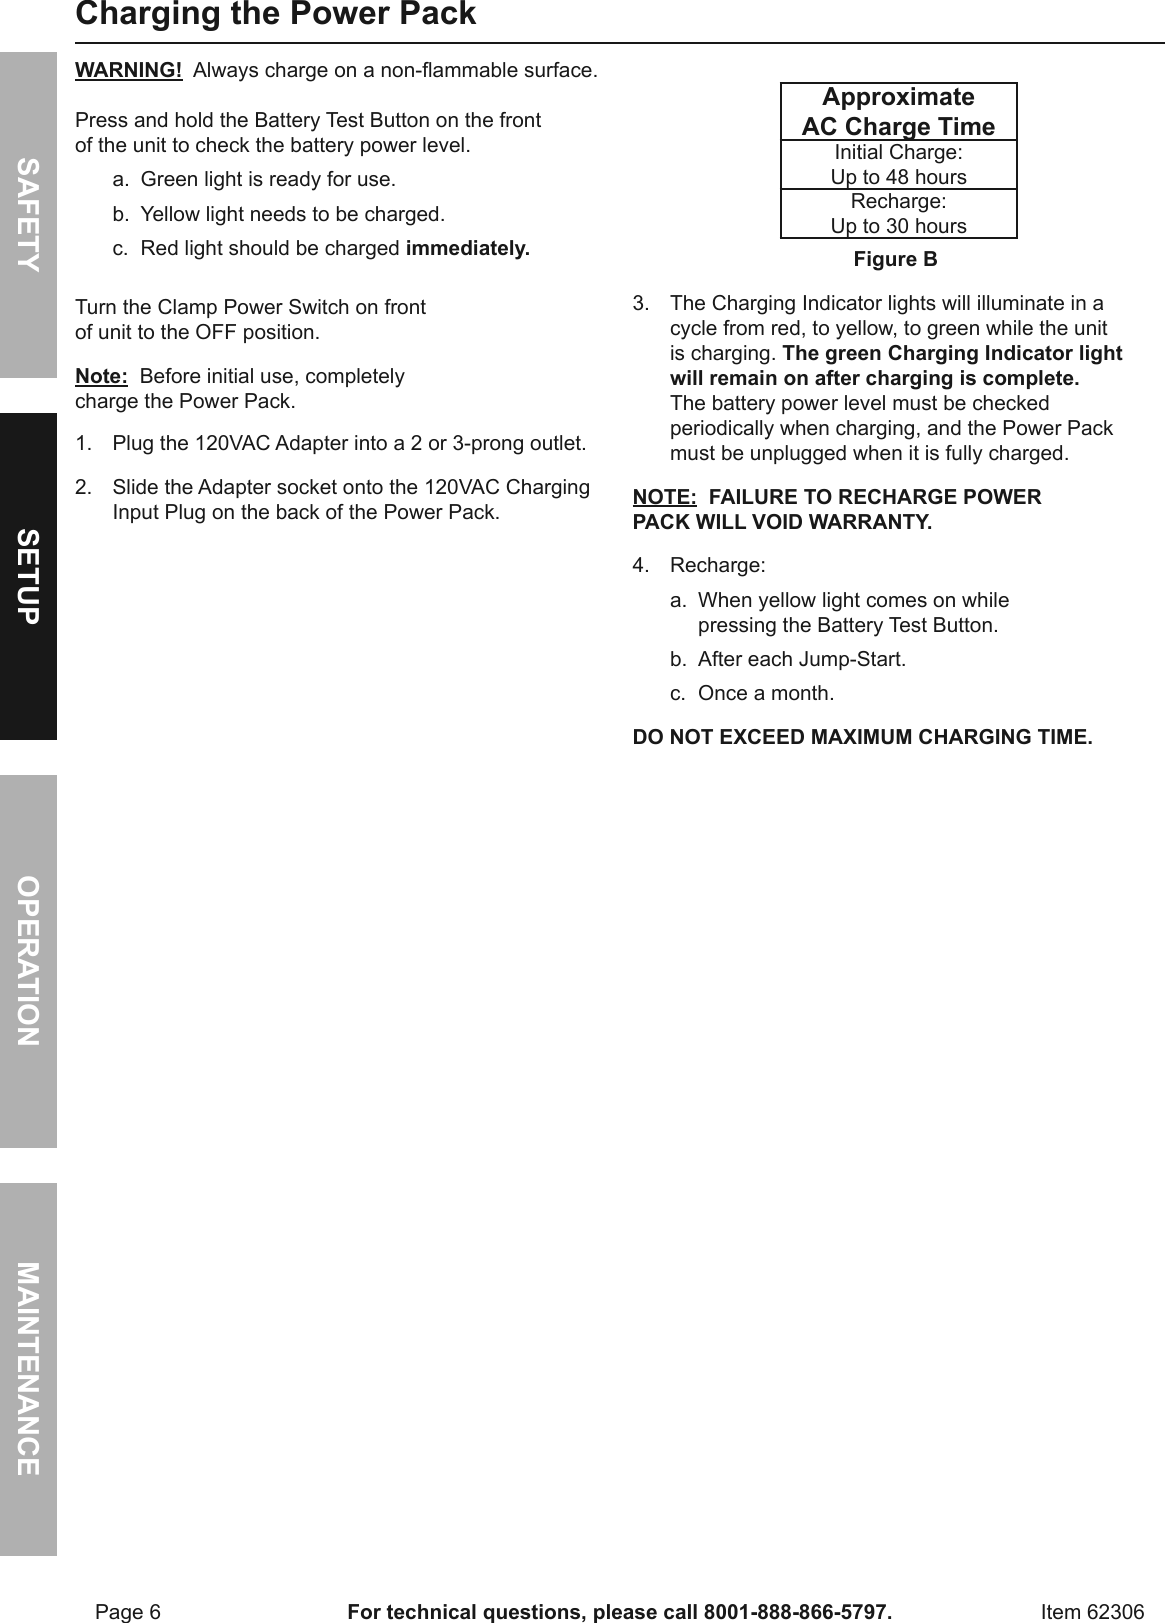 Page 6 of 12 - Manual For The 62306 3-in-1 Portable Power Pack With Jump Starter